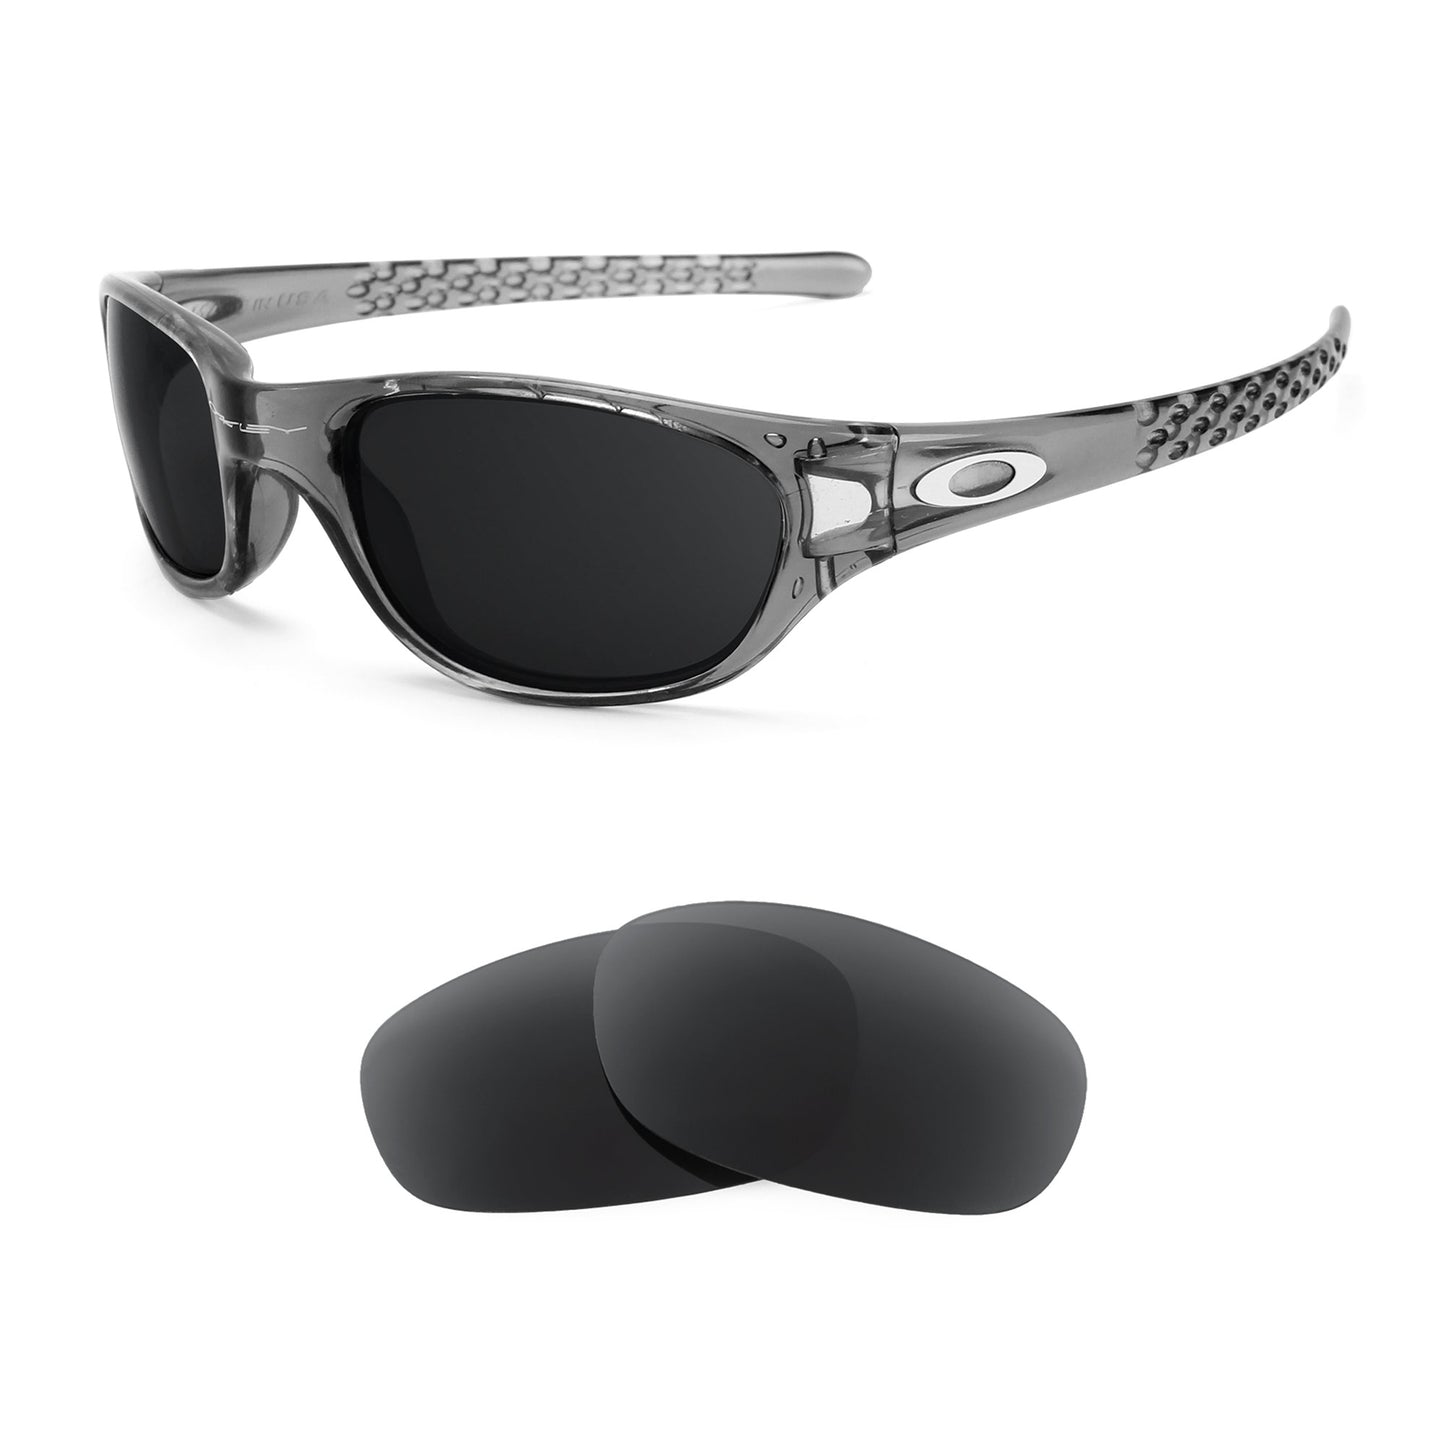 Oakley Fives 1.0 sunglasses with replacement lenses